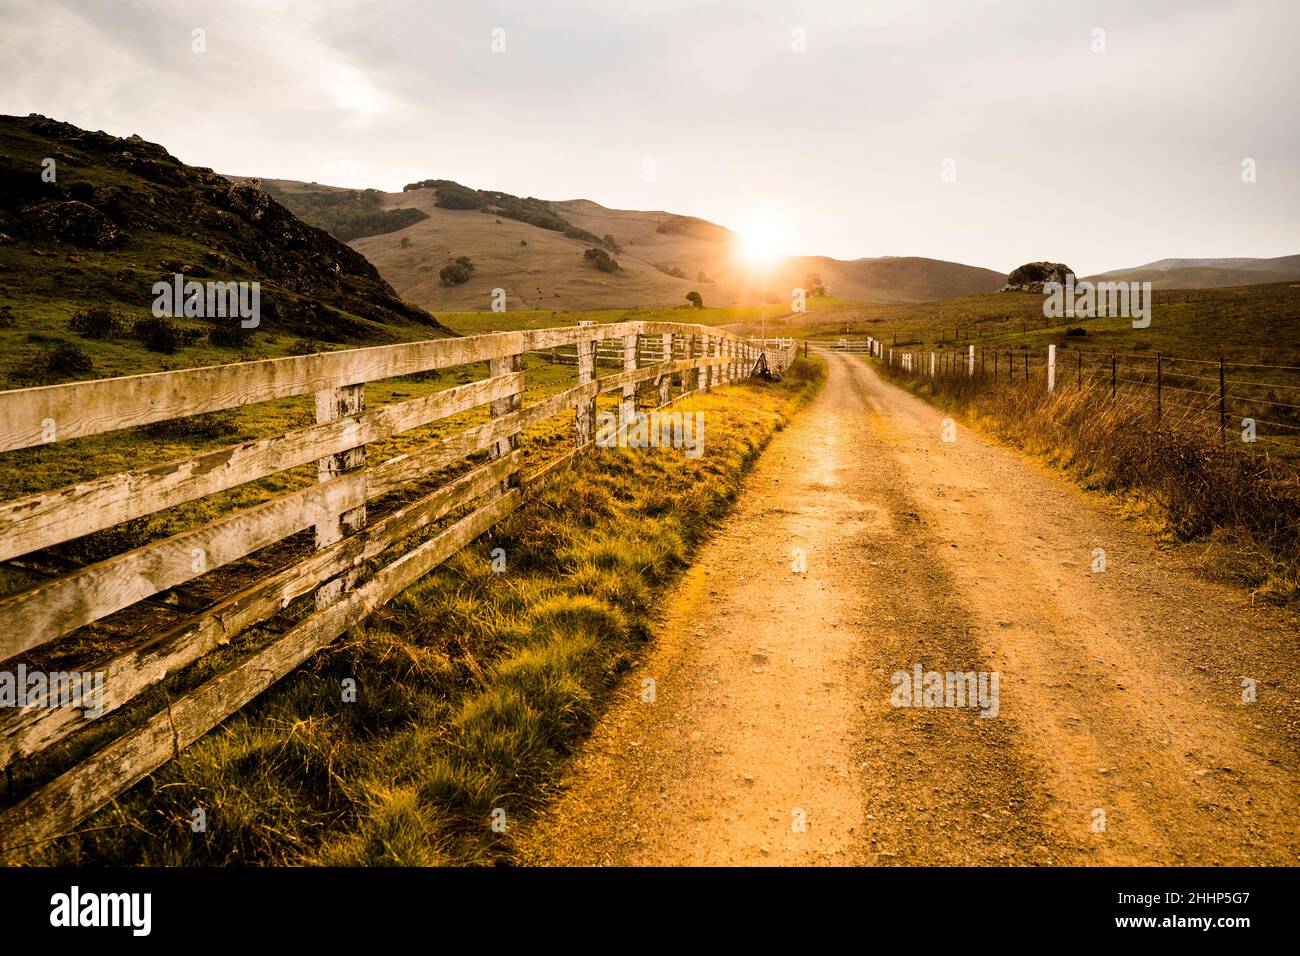 Gravel Road and Fence in the Country in Petaluma, California Stock Photo